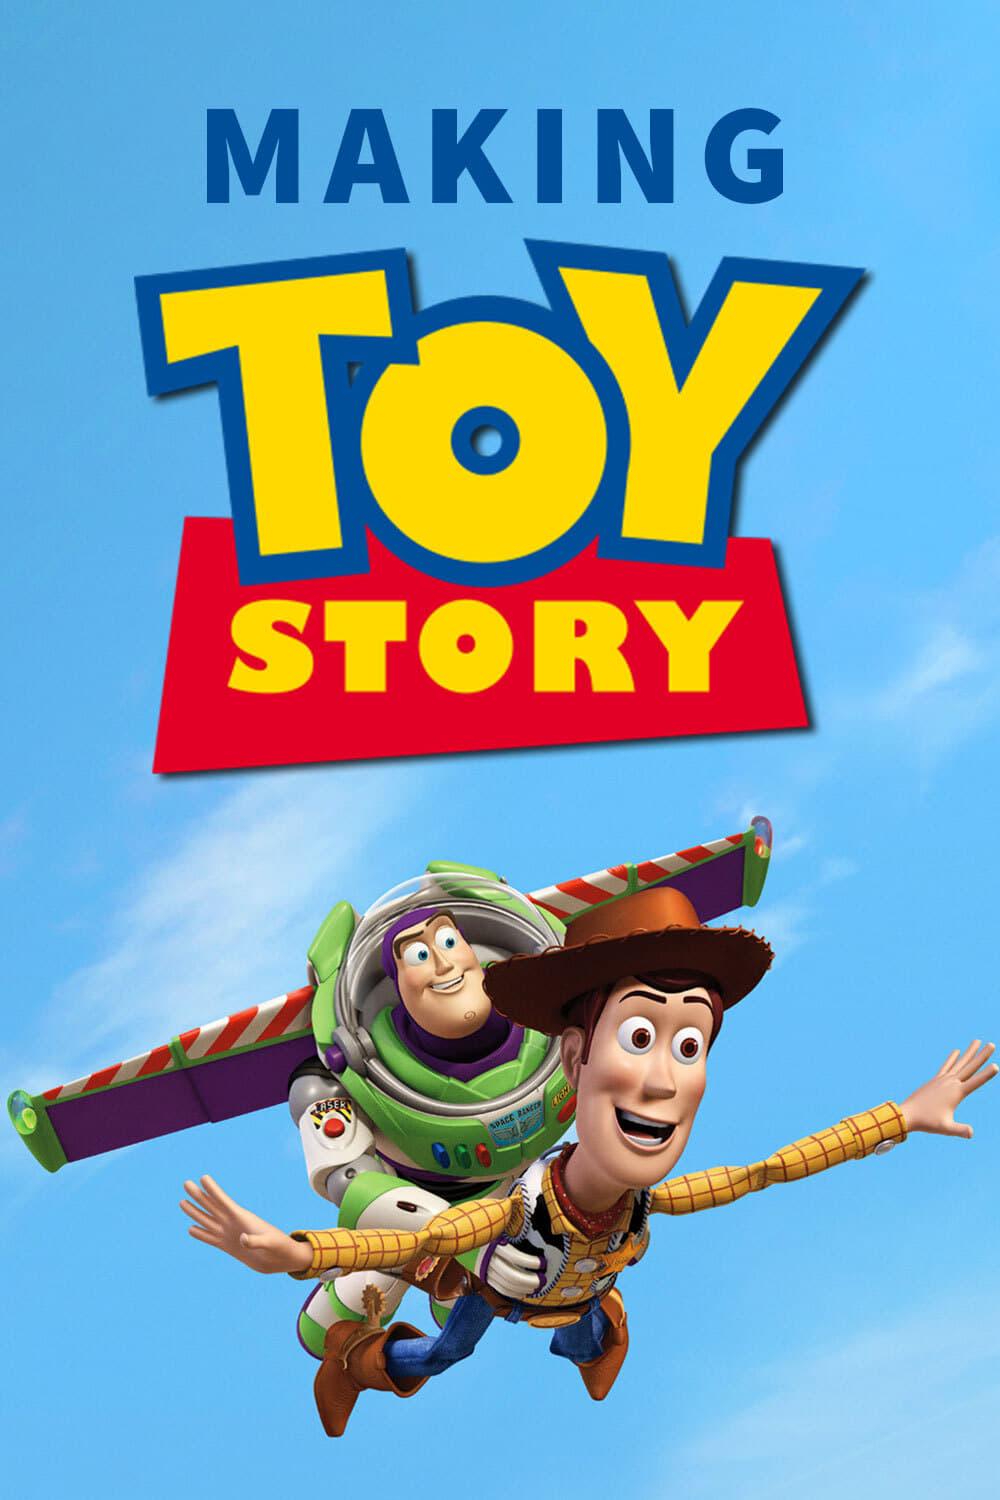 Making 'Toy Story' poster